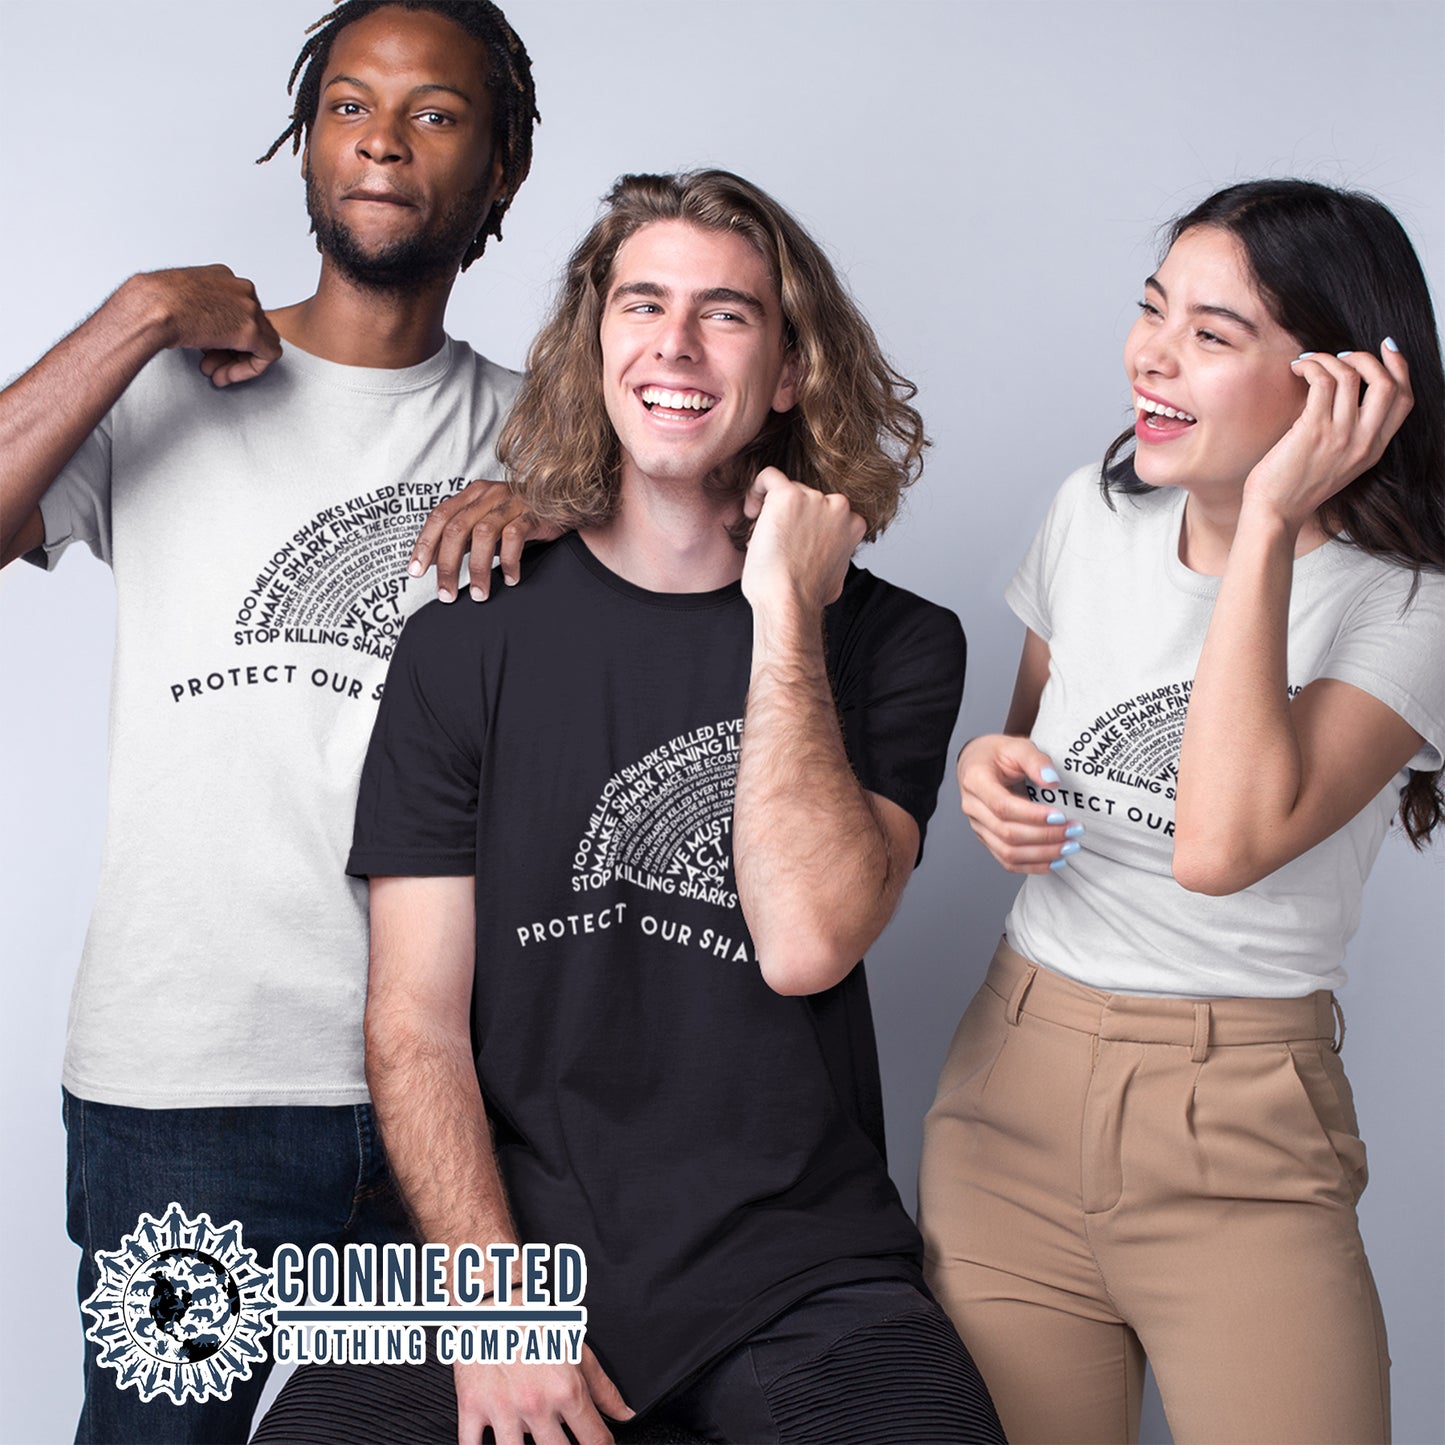 Black and White Protect Our Sharks Short-Sleeve Tees - mirandotubolsillo - Ethically and Sustainably Made - 10% of profits donated to shark conservation and ocean conservation